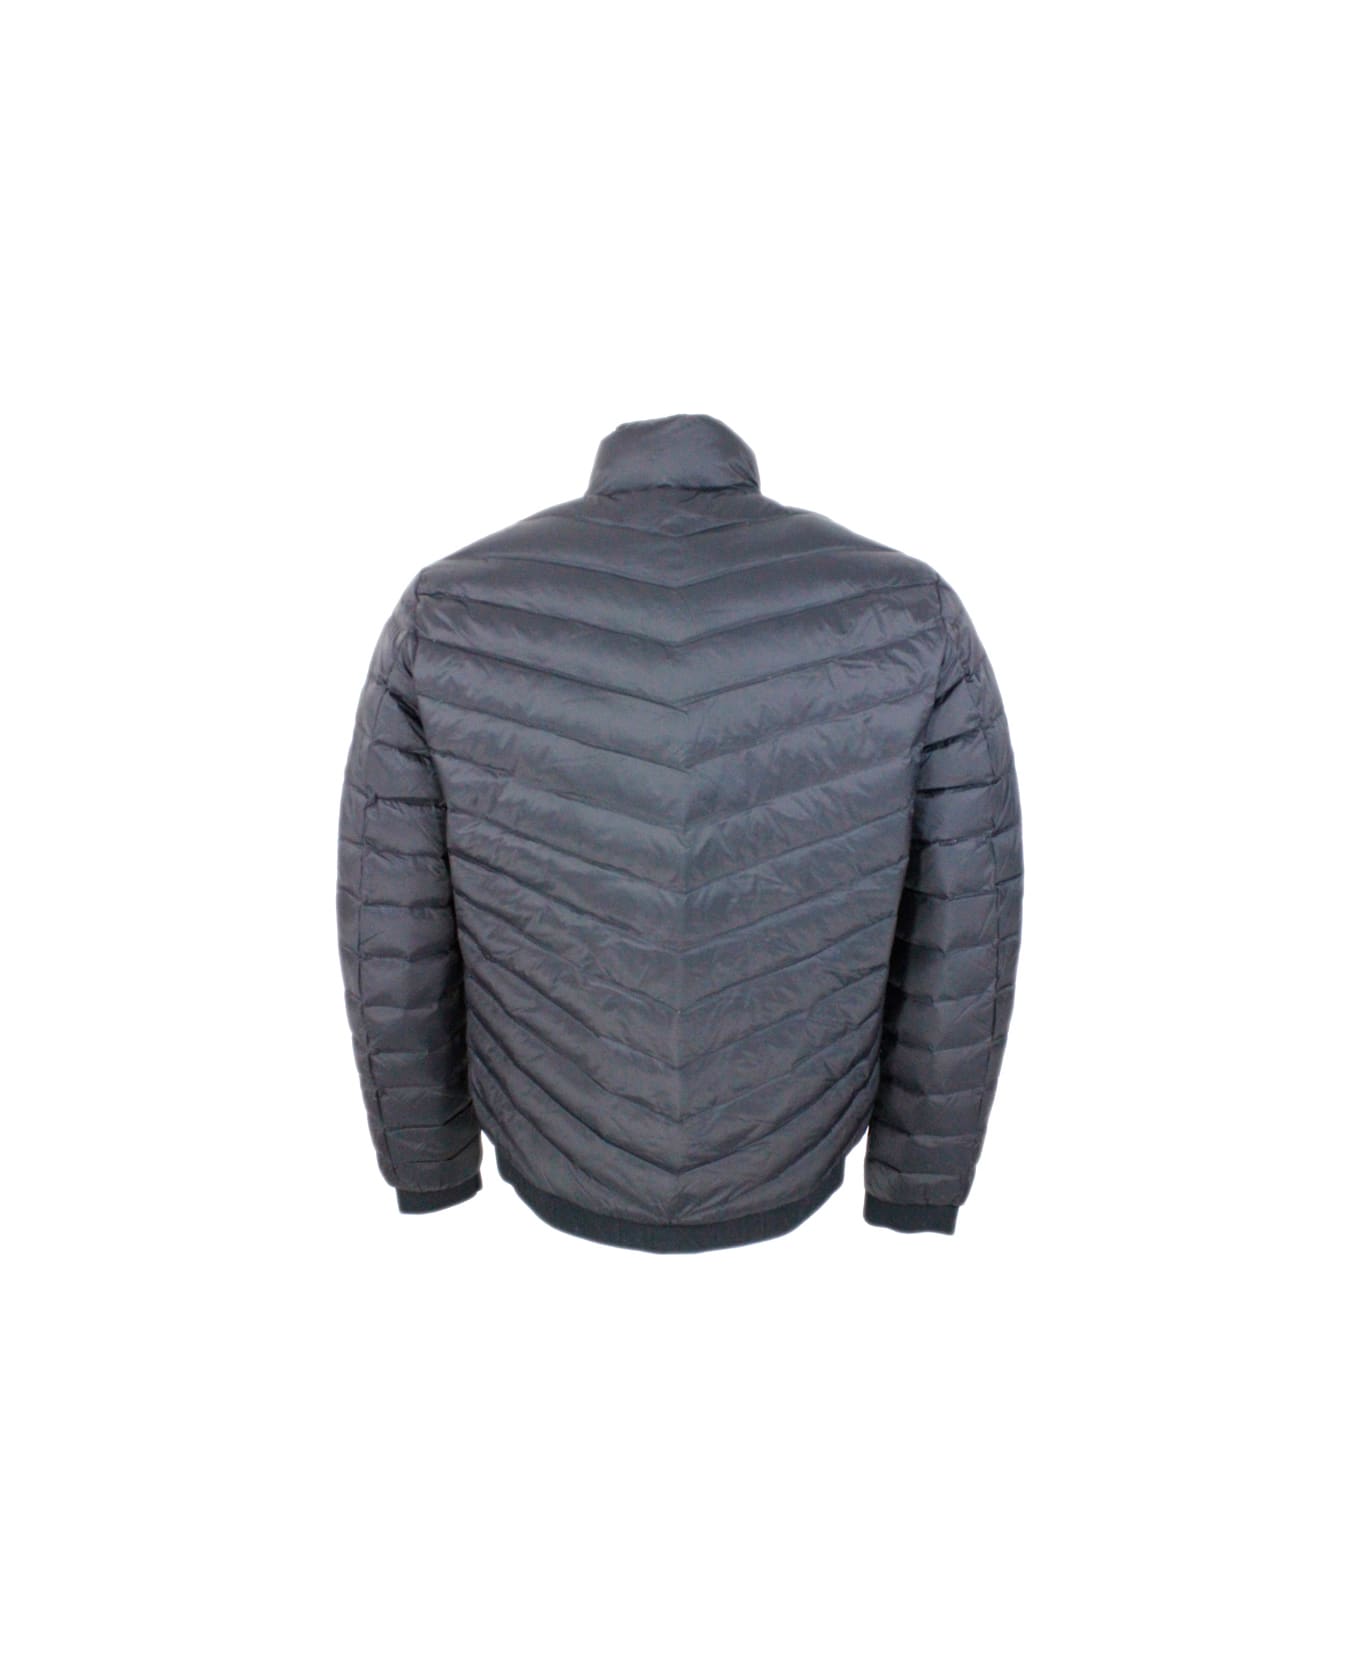 Armani Collezioni Light Down Jacket With Logoed And Elasticated Edges And Zip Closure - Grey Dark ダウンジャケット